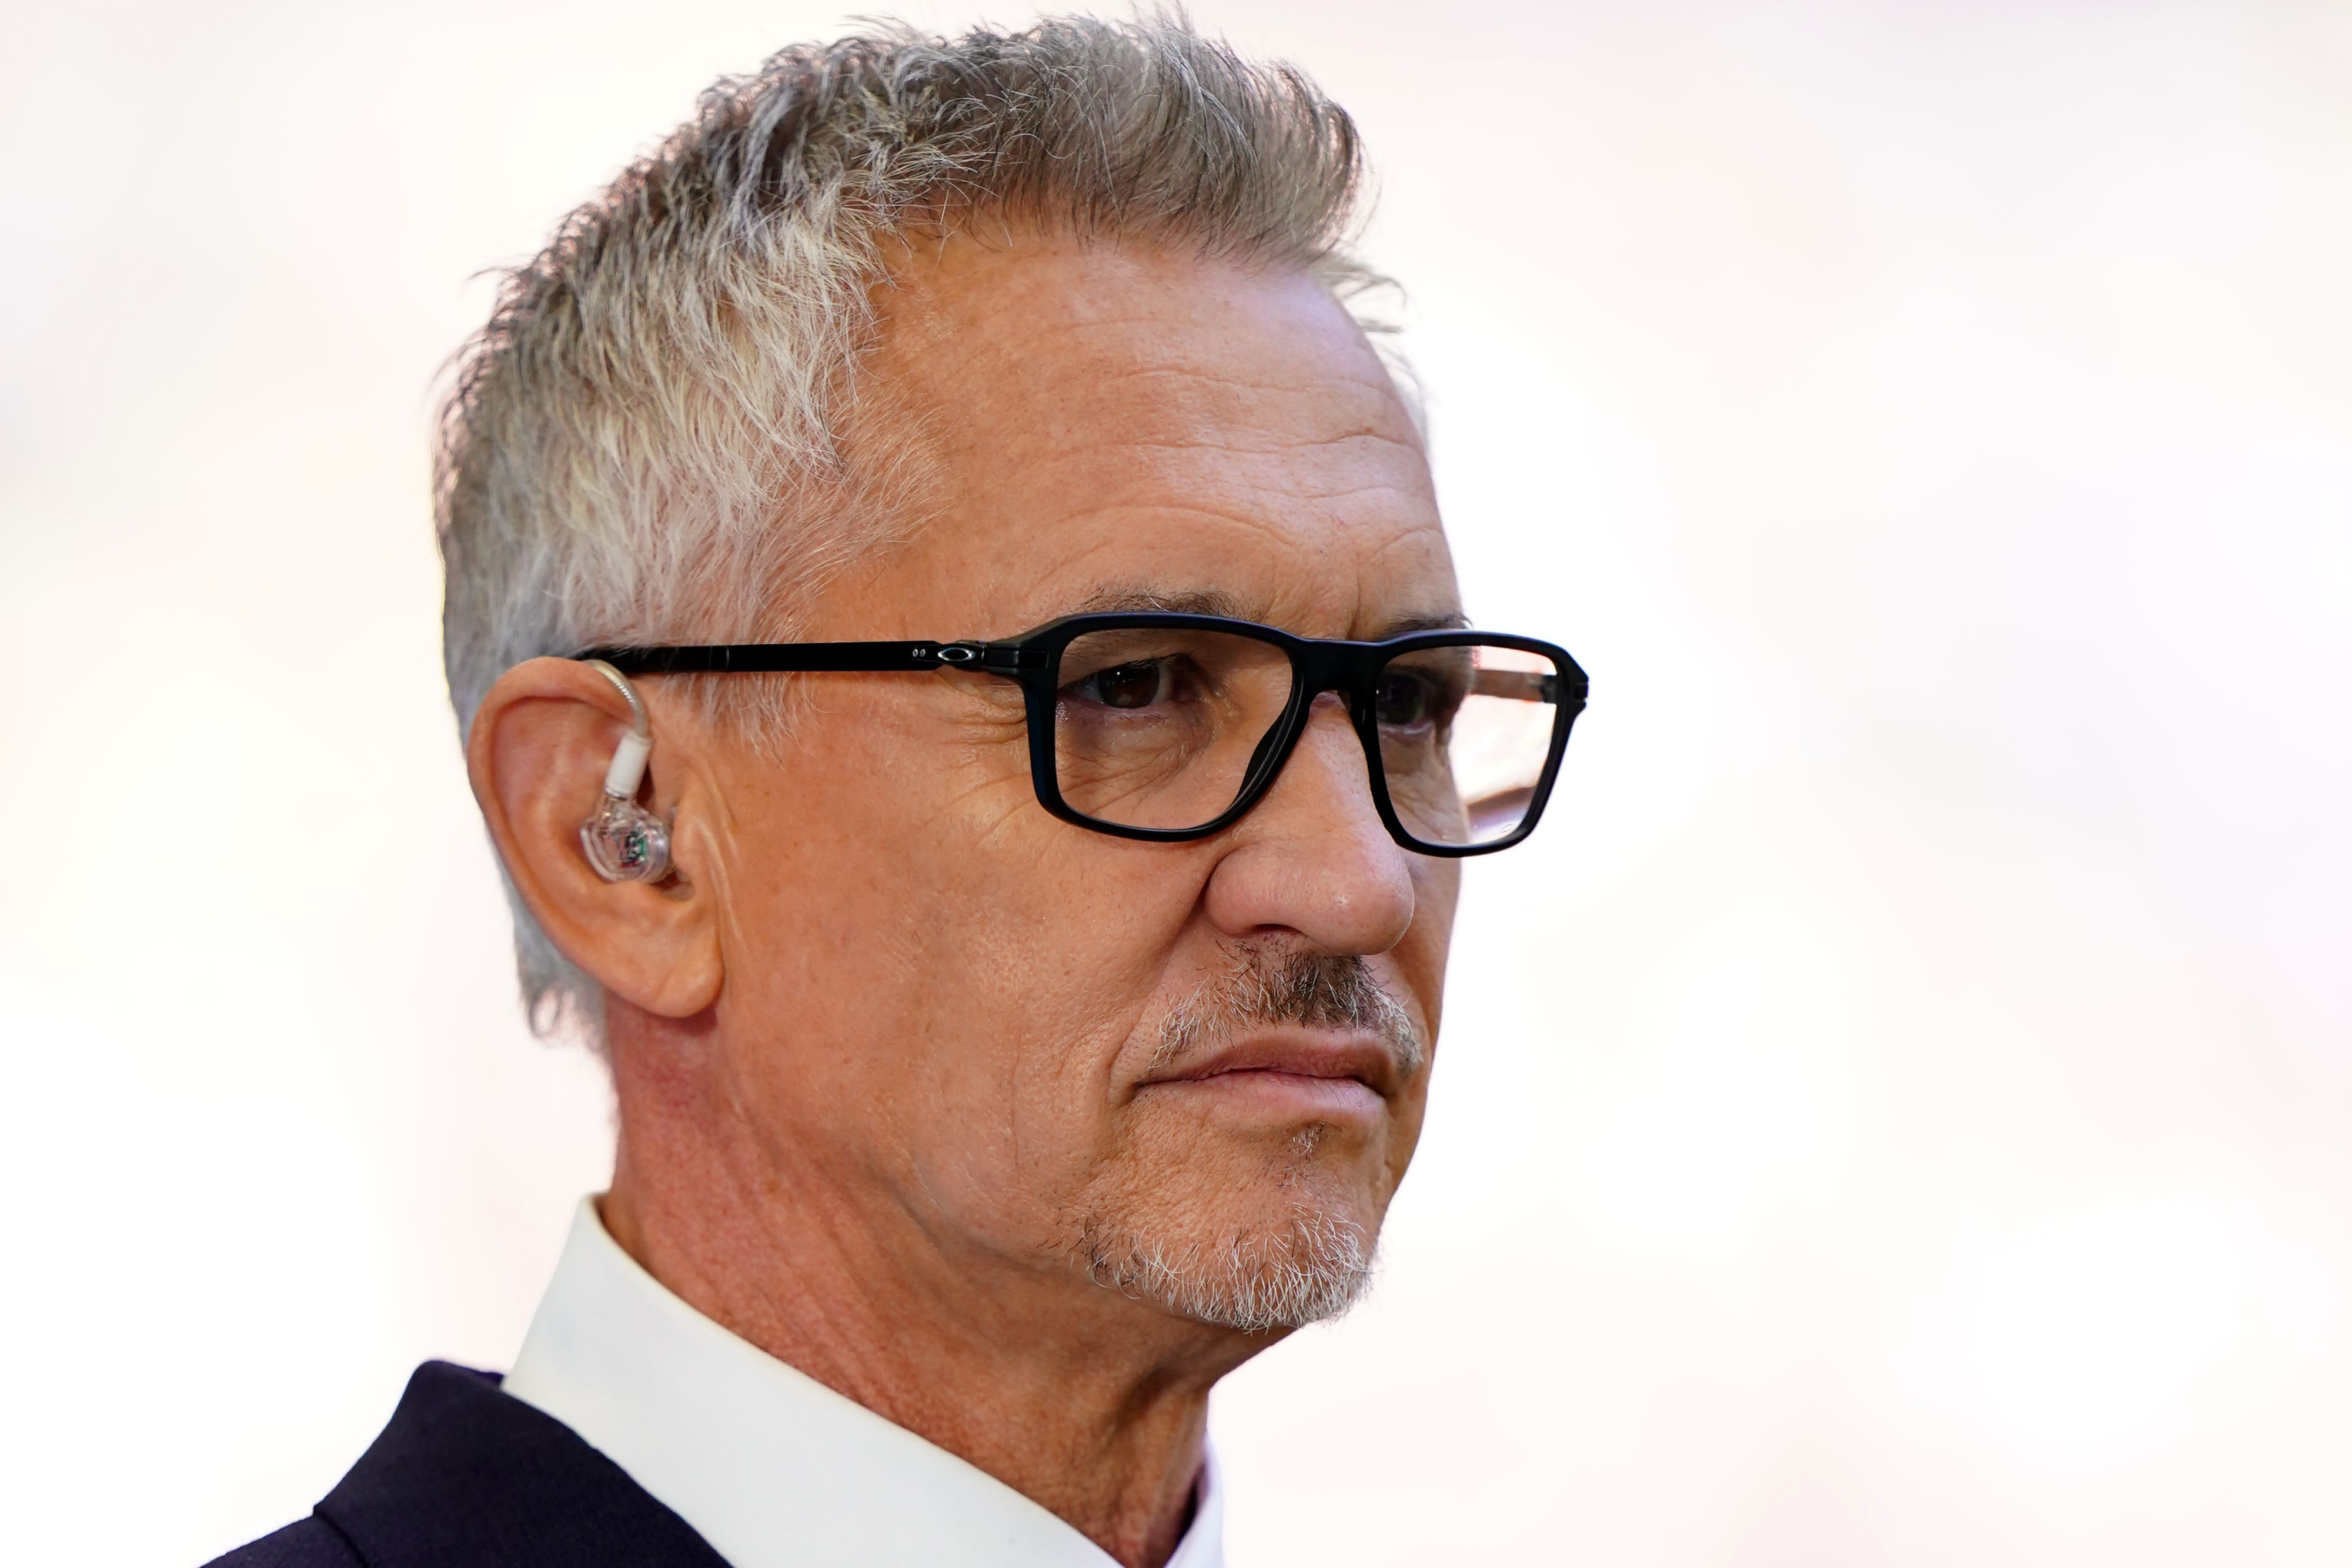 Lineker has been unflinching in his criticism of the new immigration bill